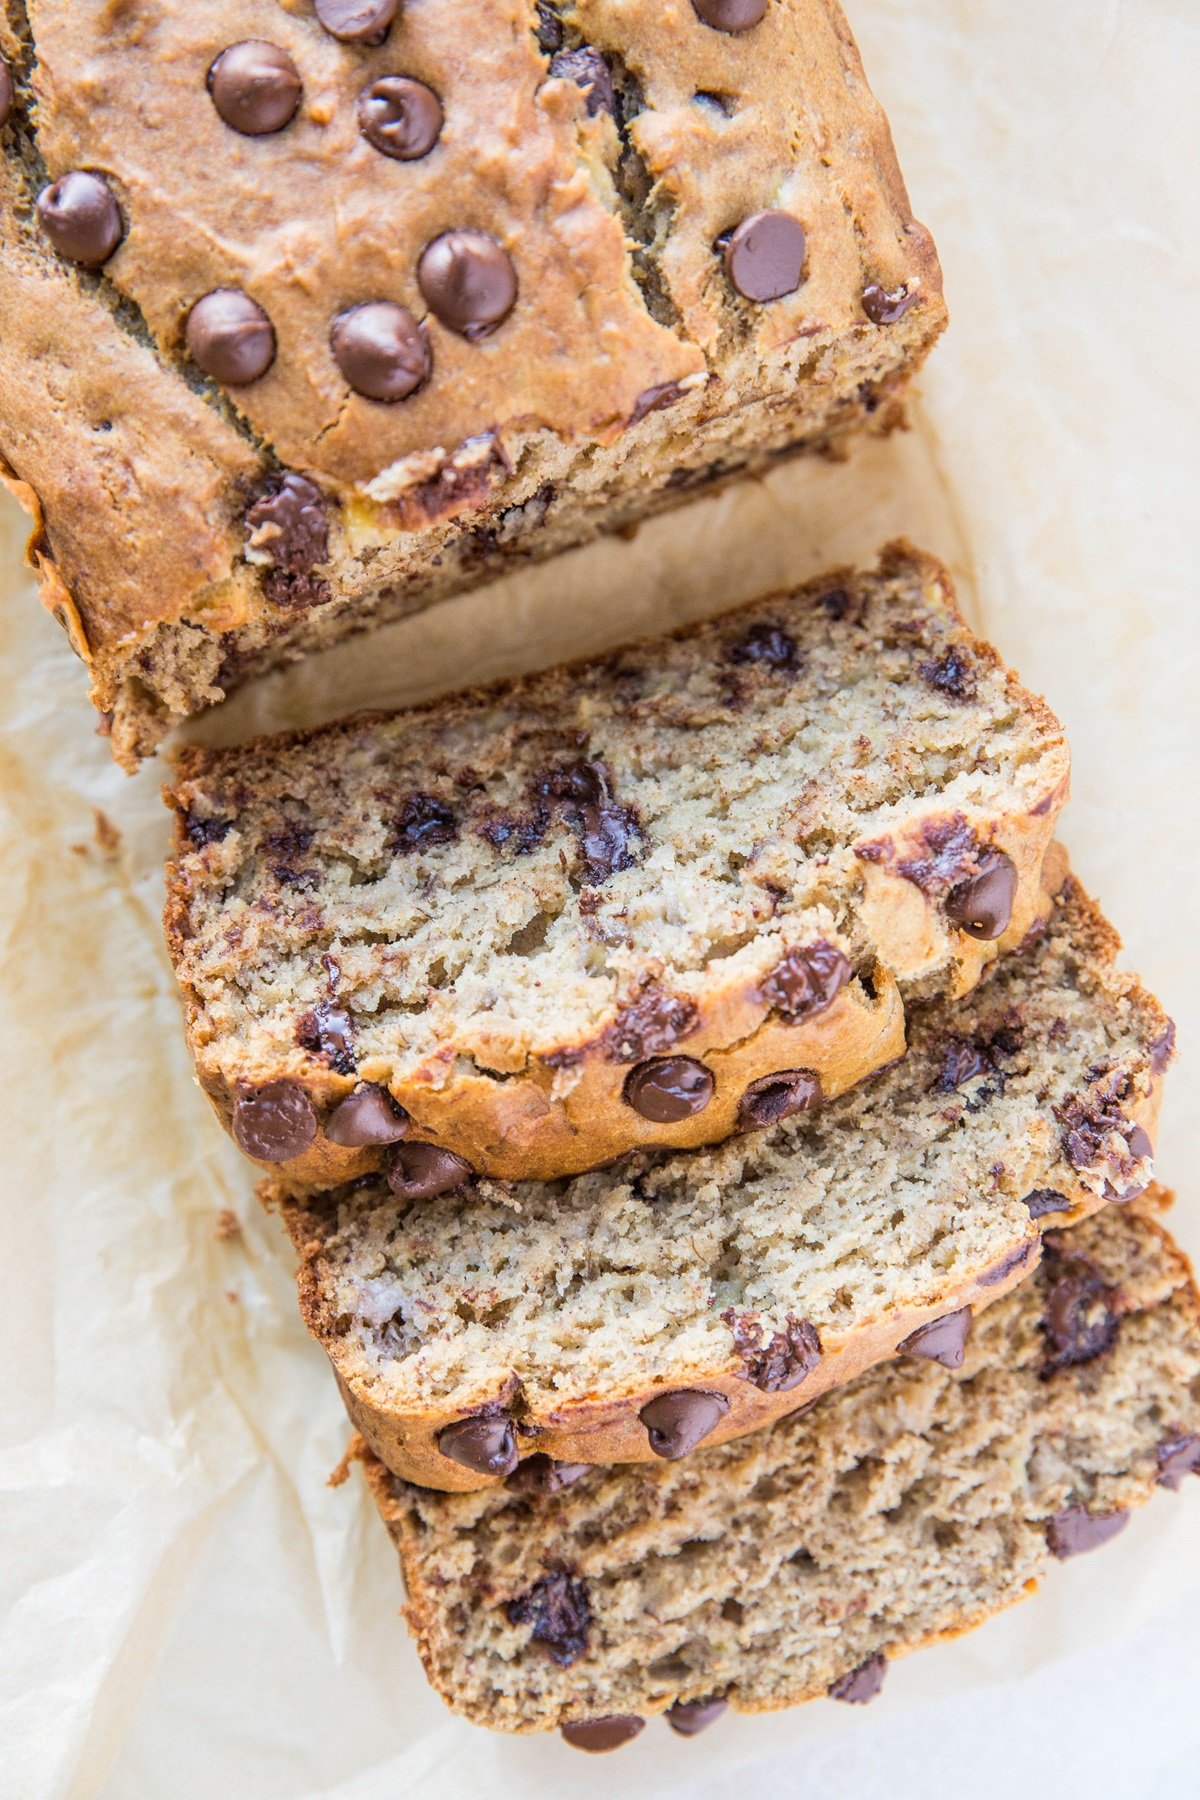 Perfect Gluten-Free Banana Bread - a healthy banana bread recipe sweetened mostly with banana and some coconut sugar